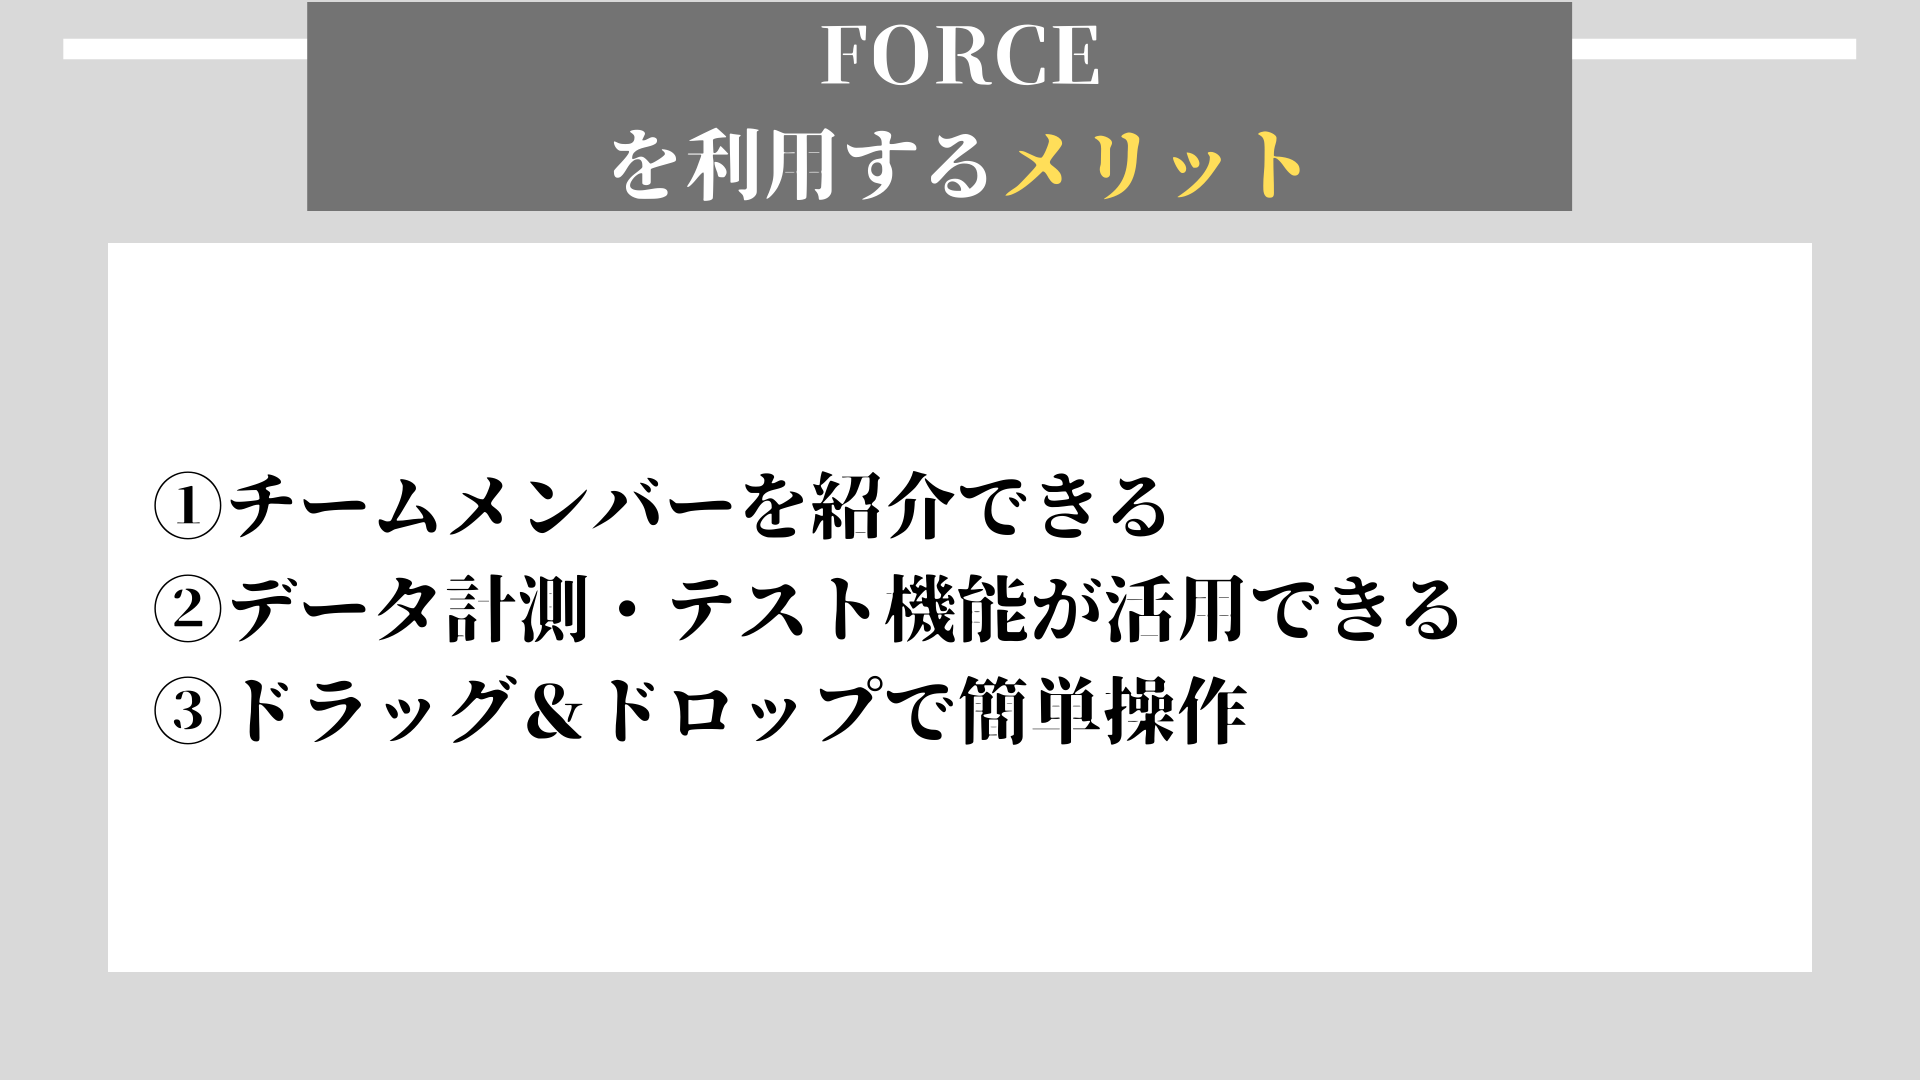 FORCE　メリット